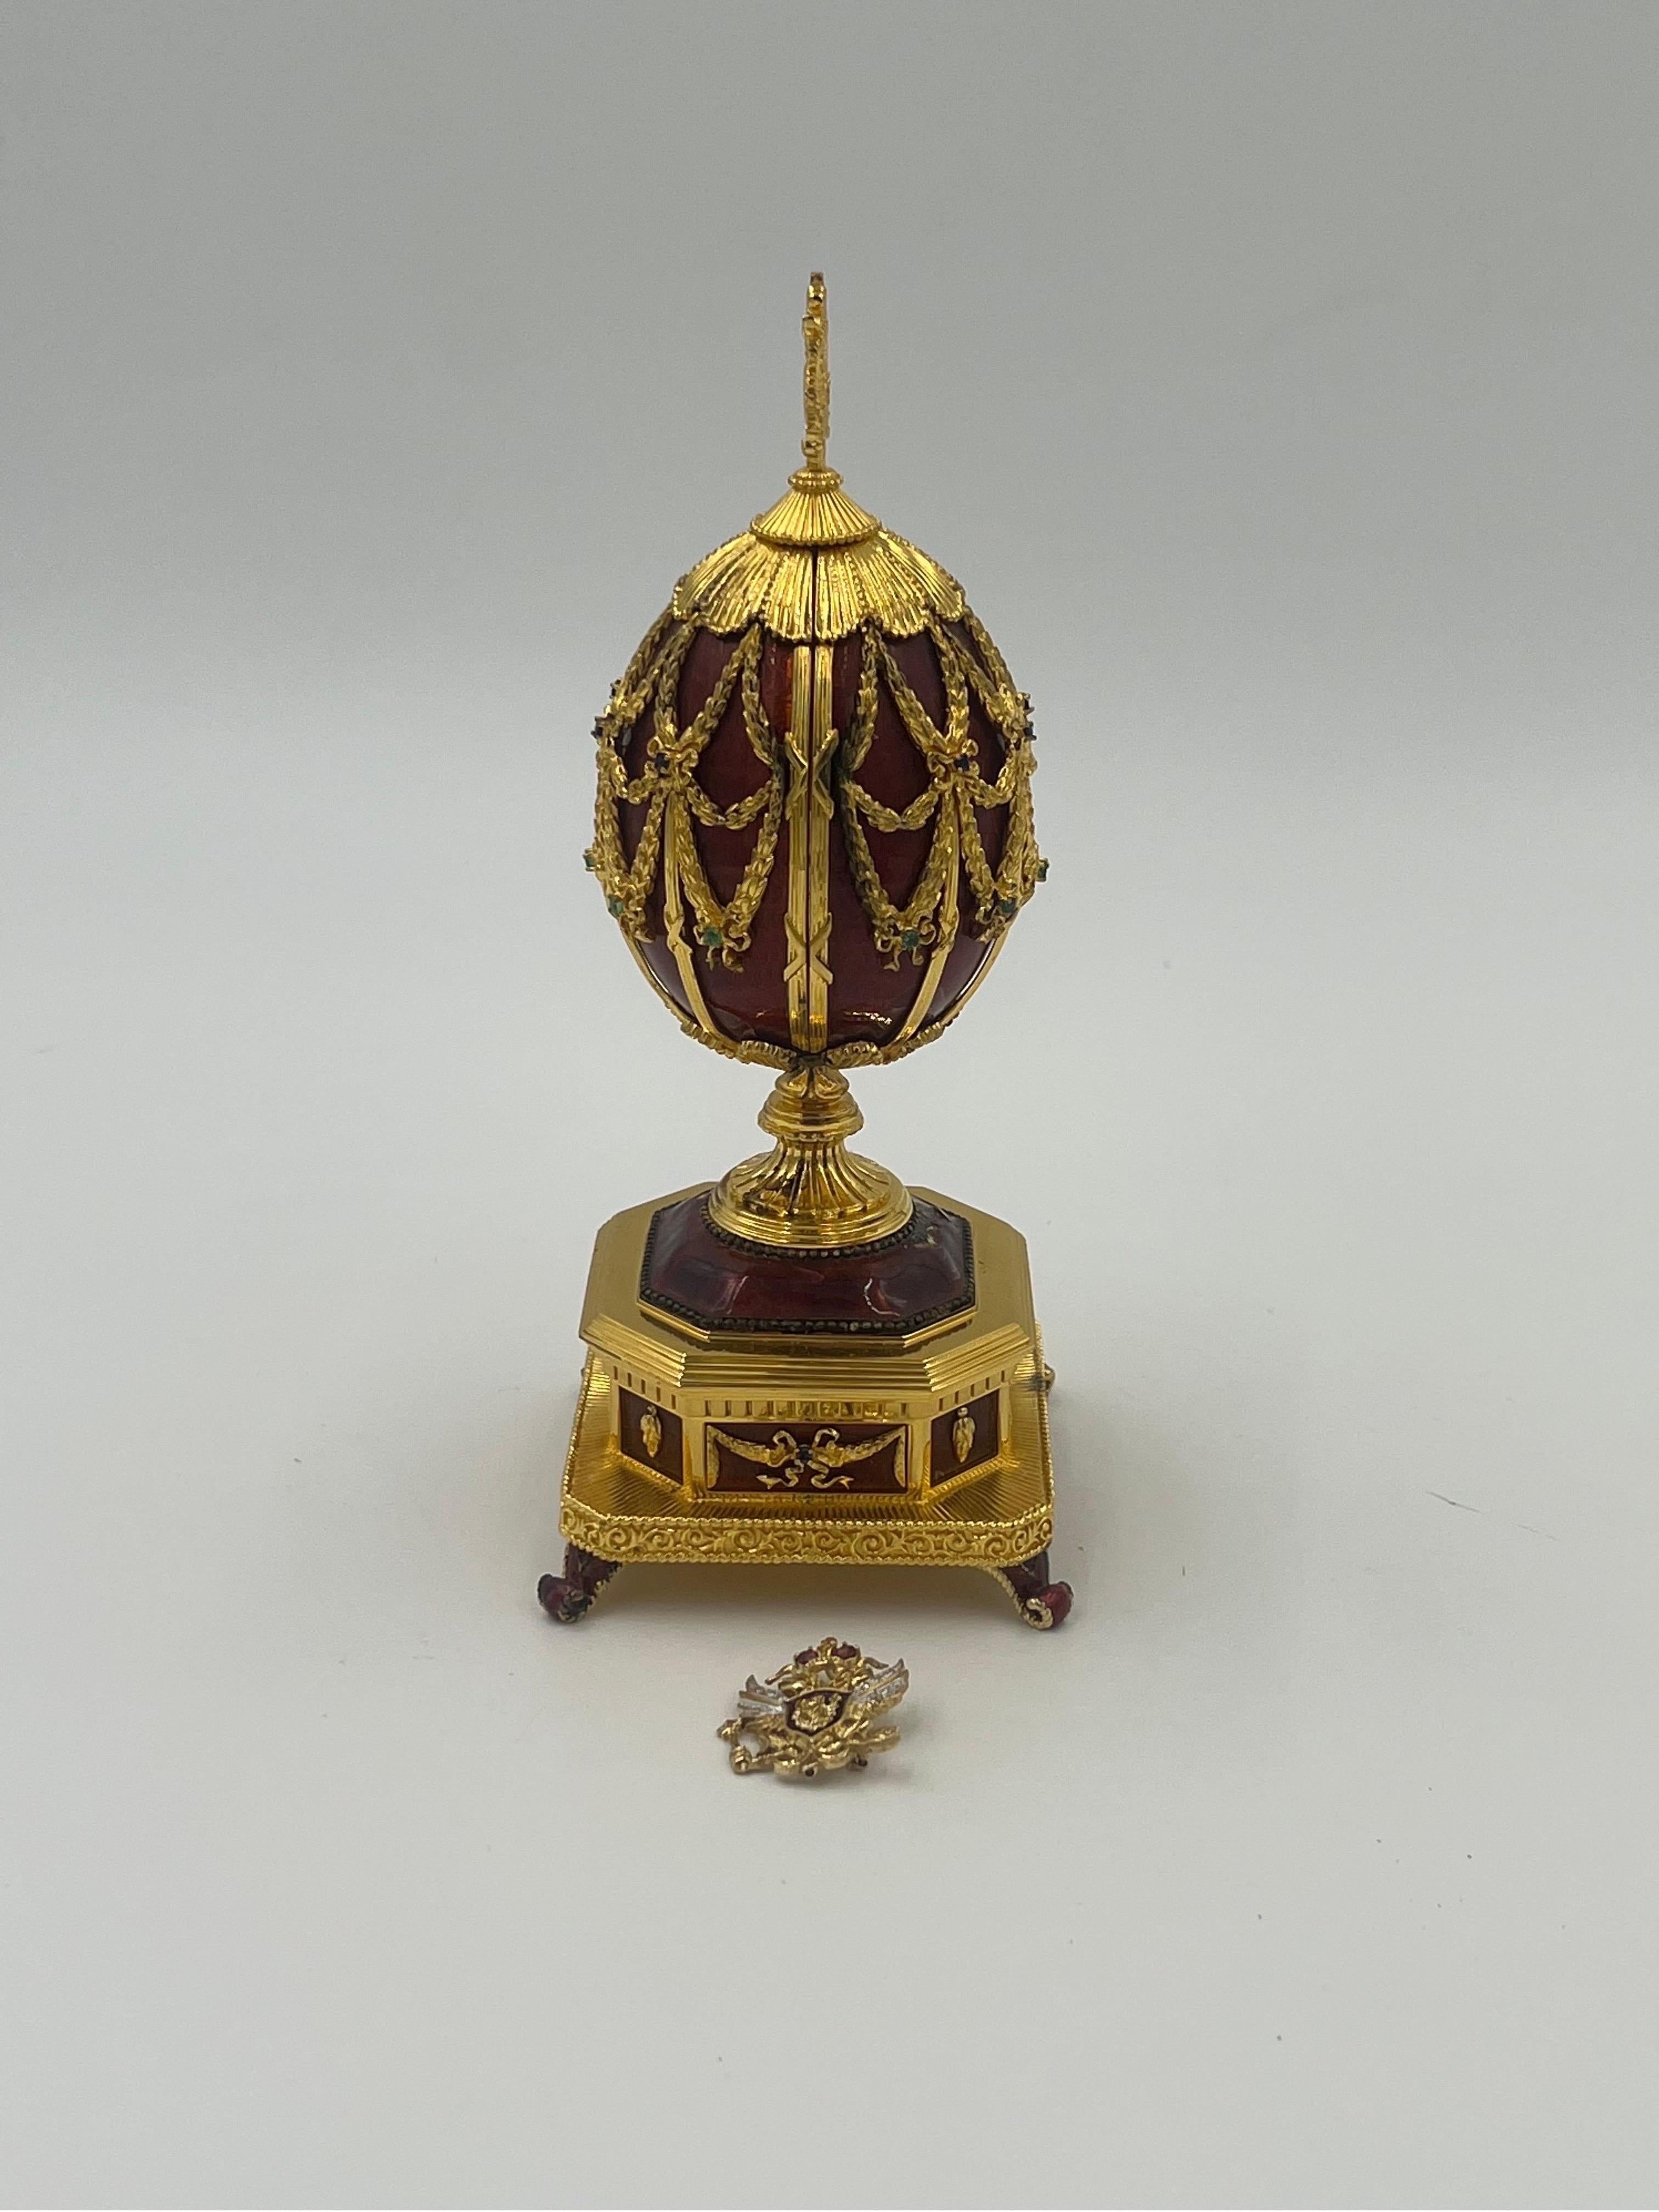 We are extremely pleased to introduce for sale our very rare & amazingly beautiful Faberge Imperial Musical Egg collection, manufactured by the Franklin Mint in pure Sterling Silver. Our authentic Faberge Eggs feature solid Sterling Silver